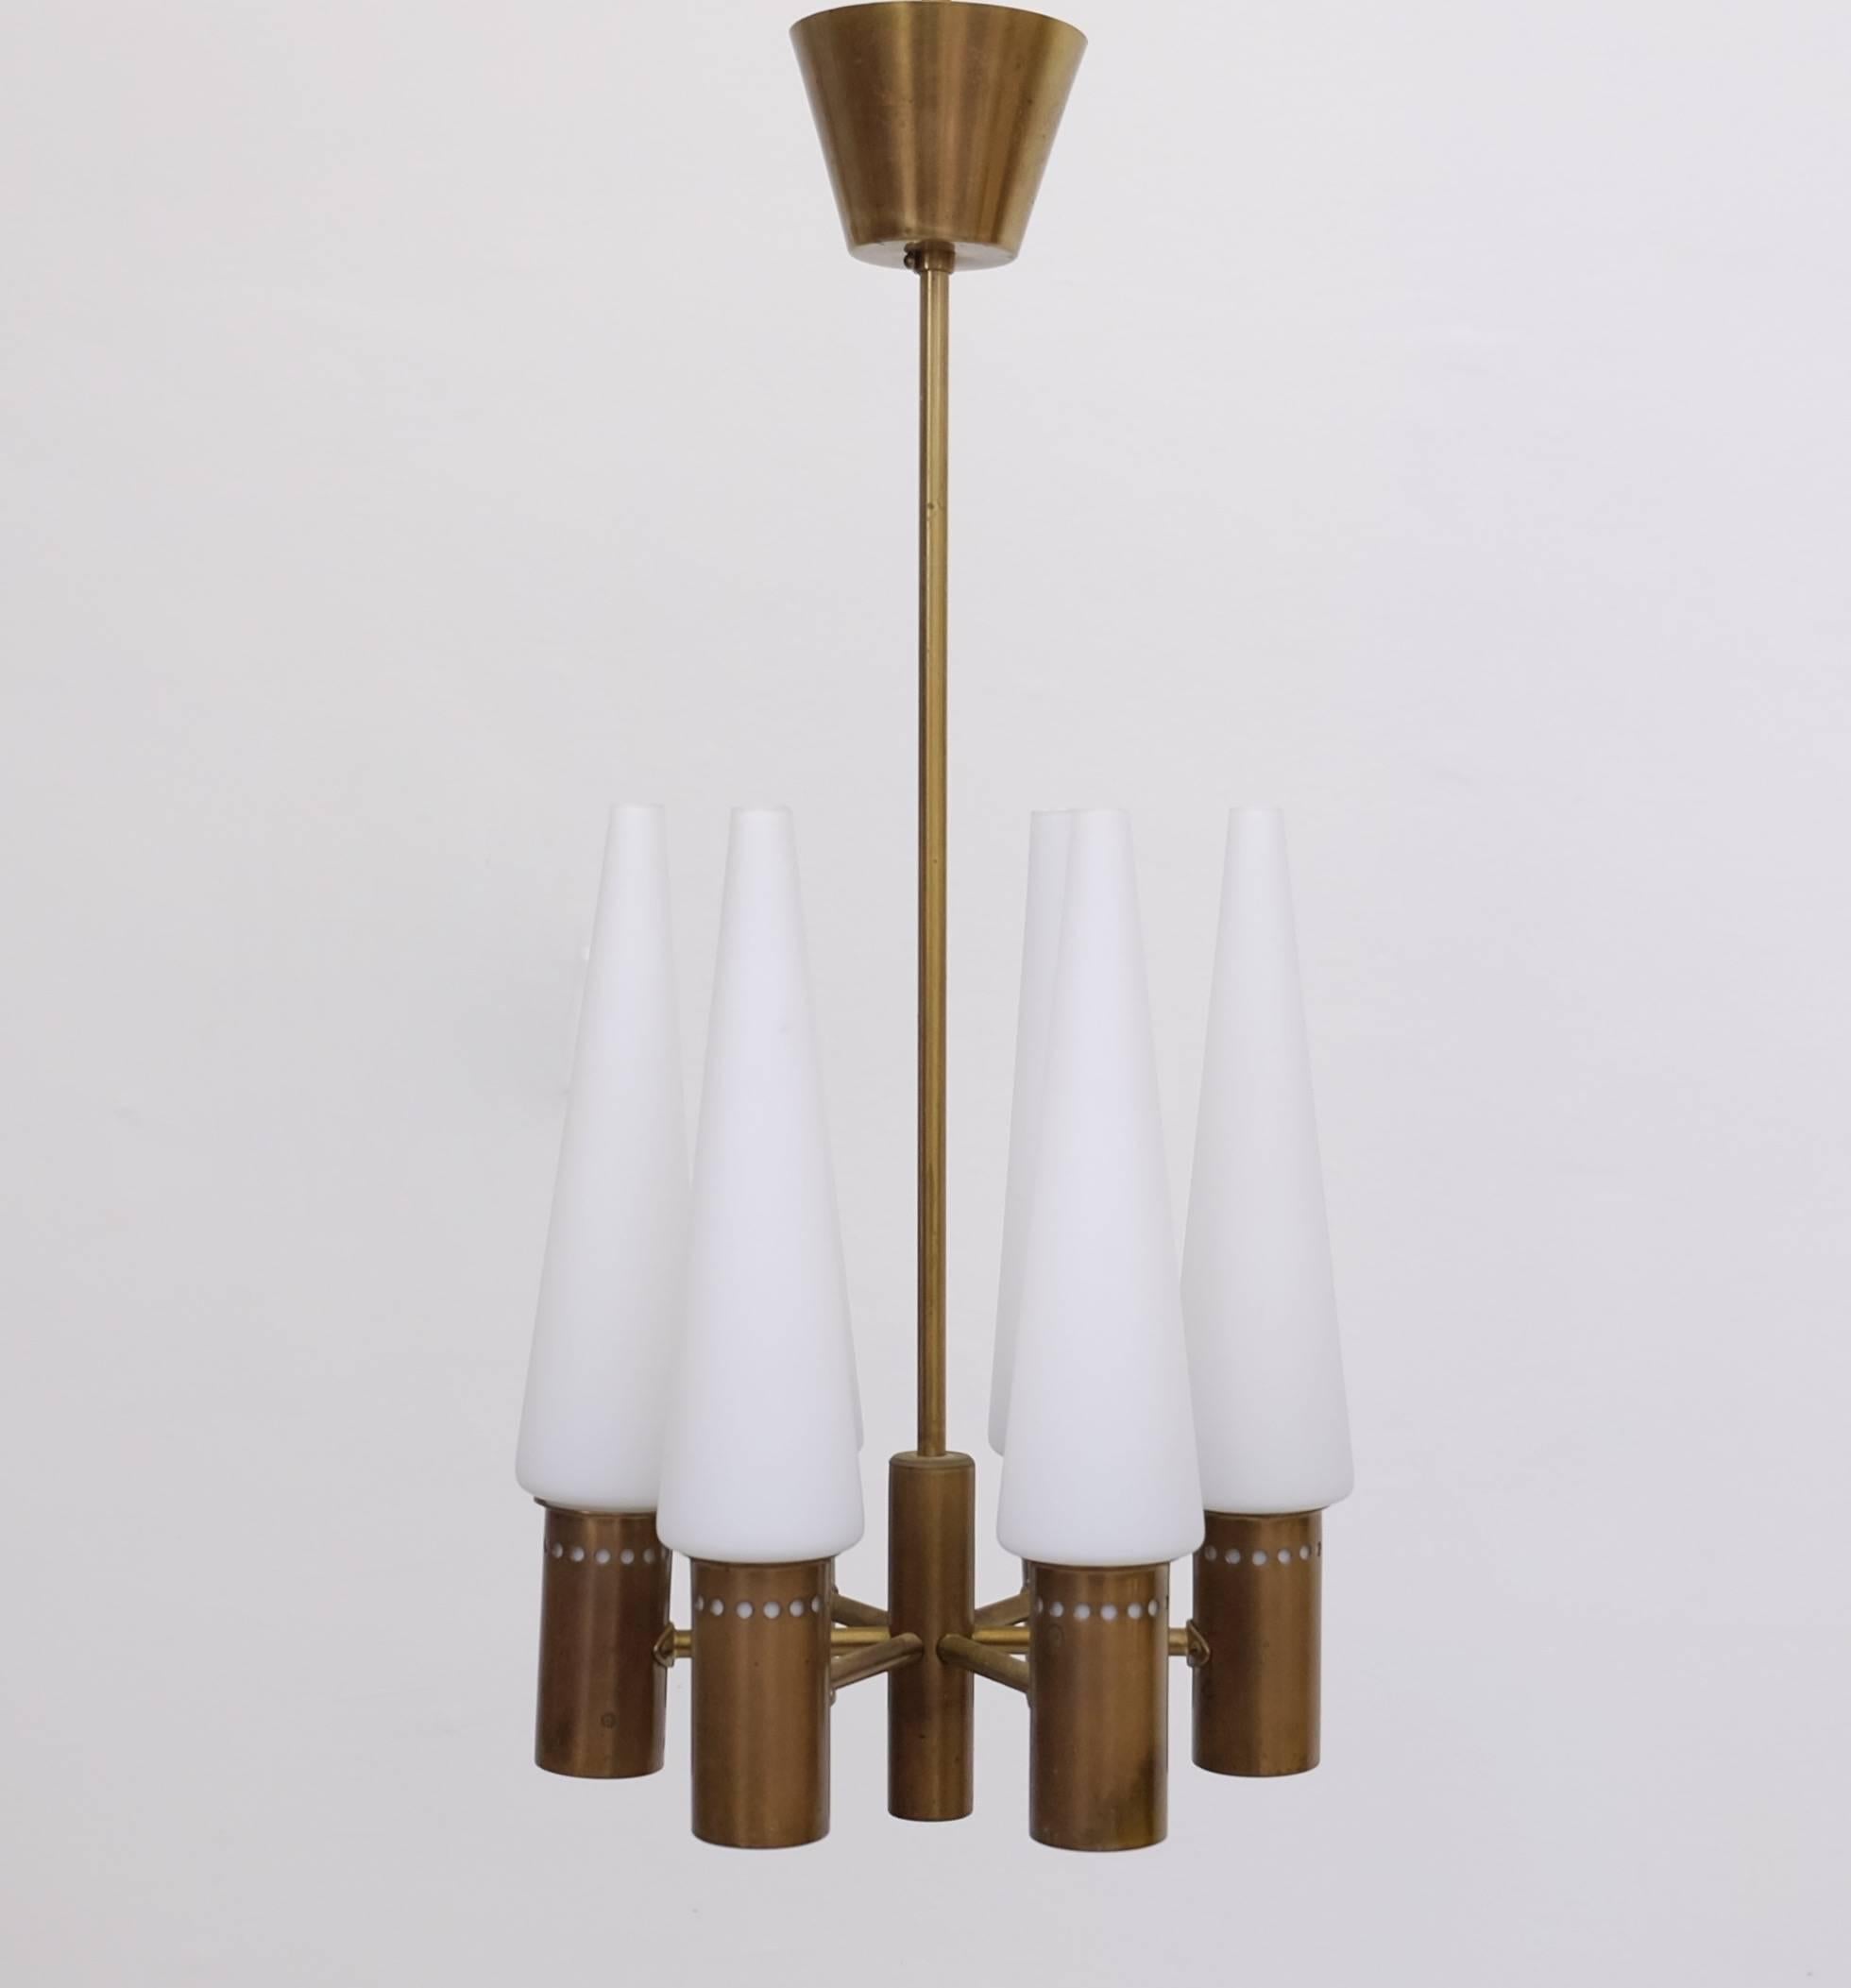 Brass and opaline glass. Produced by Hans-Agne Jakobsson AB in Markaryd, Sweden, 1960s.